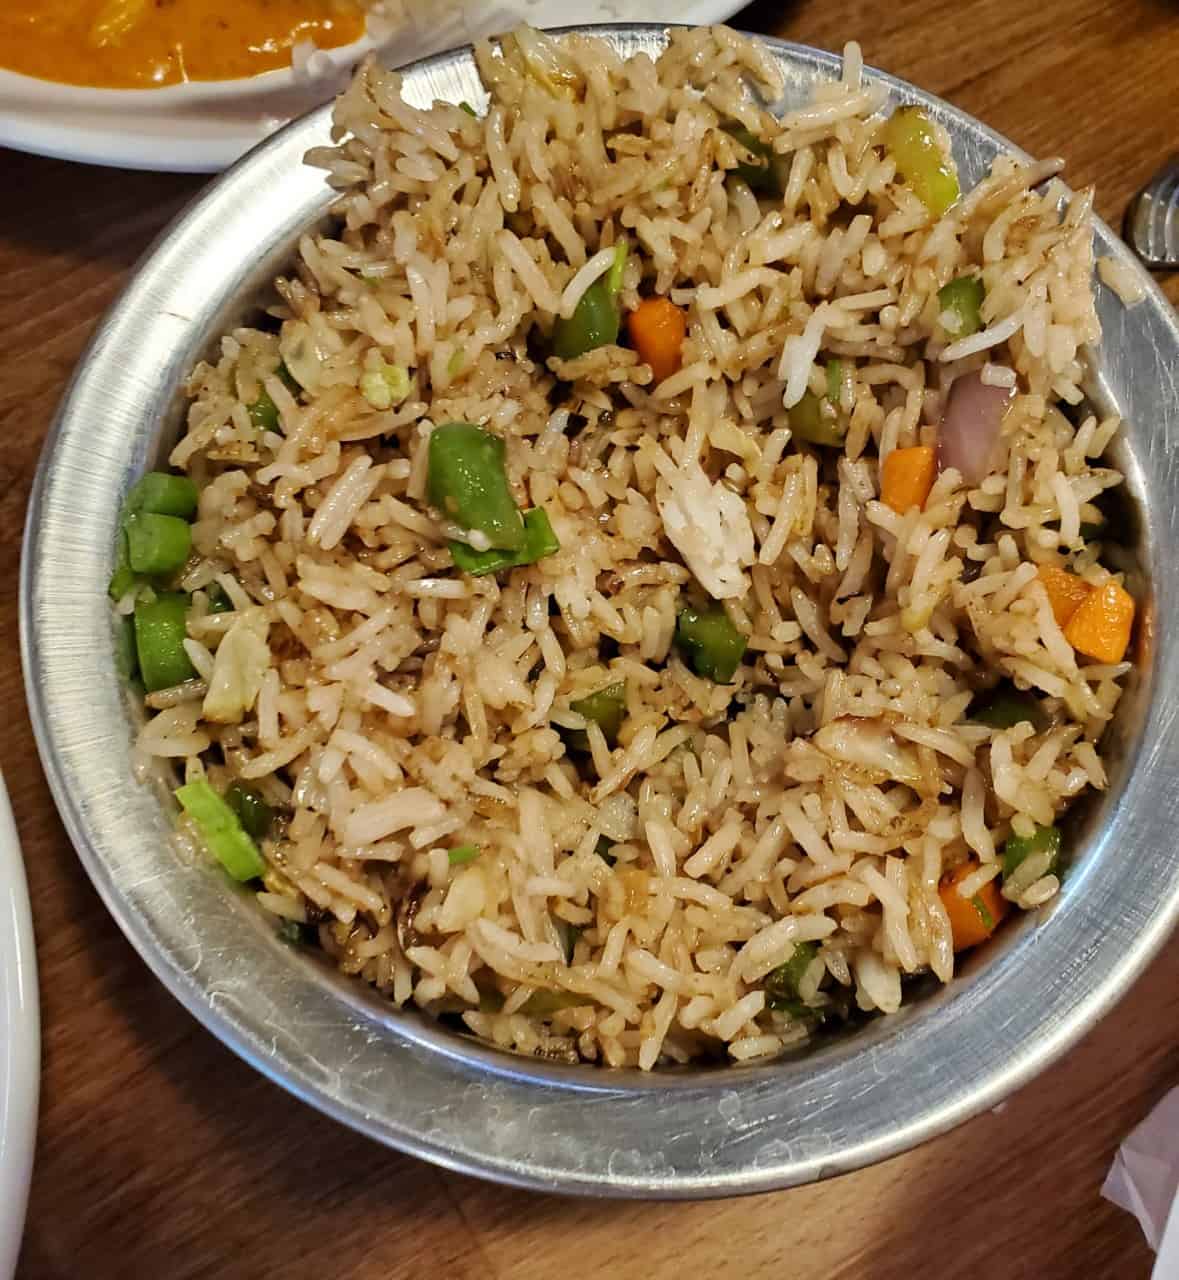 Vegetable Fried Rice Indian Bites Restaurant  - Little seeker requested rice for dinner. Easy enough! Indian Bites has a few options for rice meals. The vegetable fried rice was the pick for tonight. 